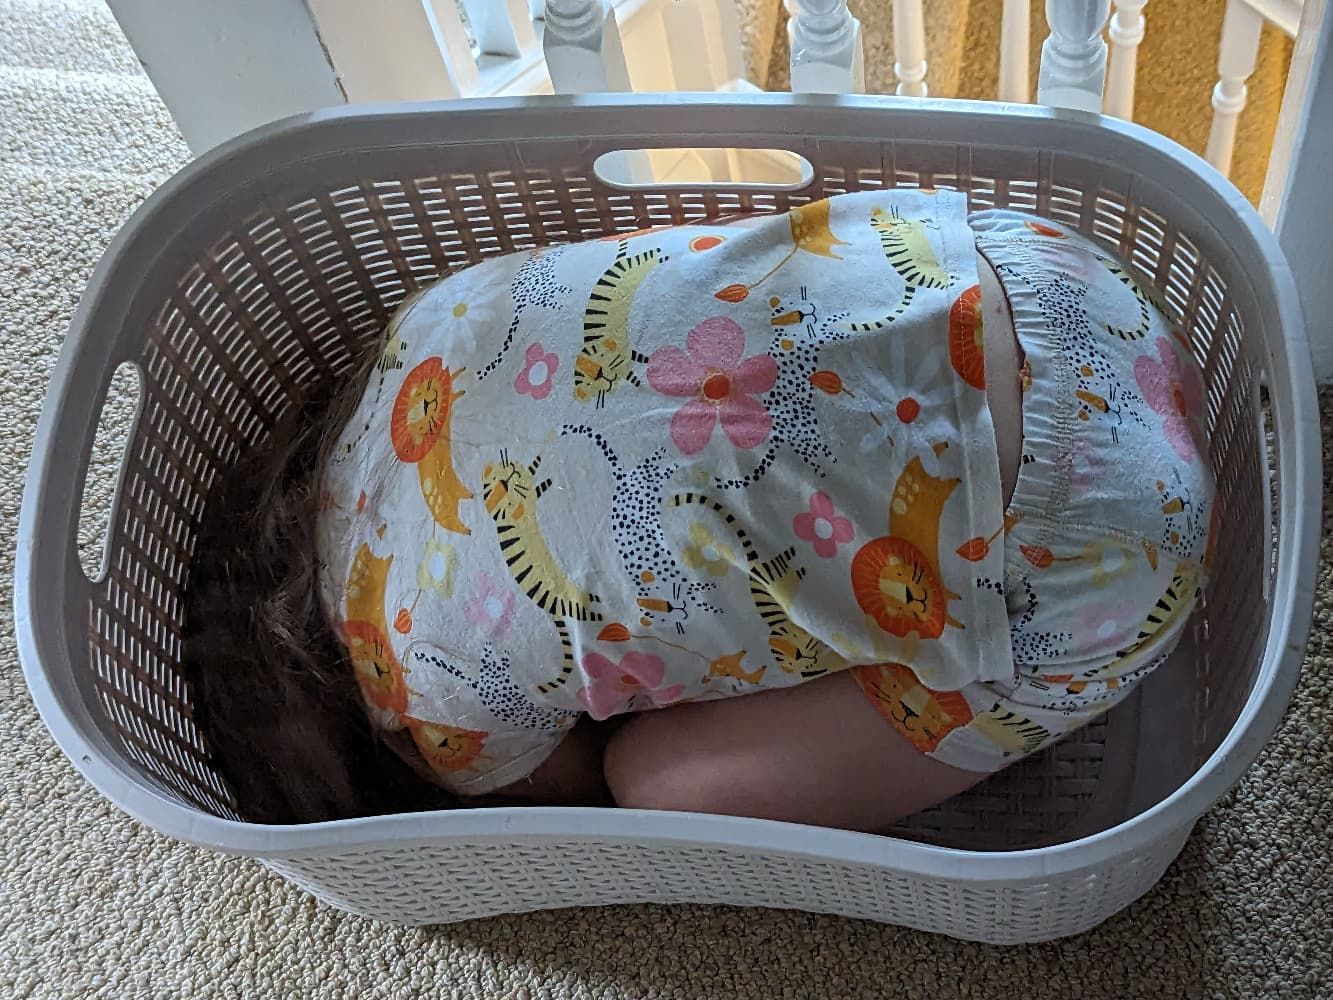 A small child hiding in a laundry basket